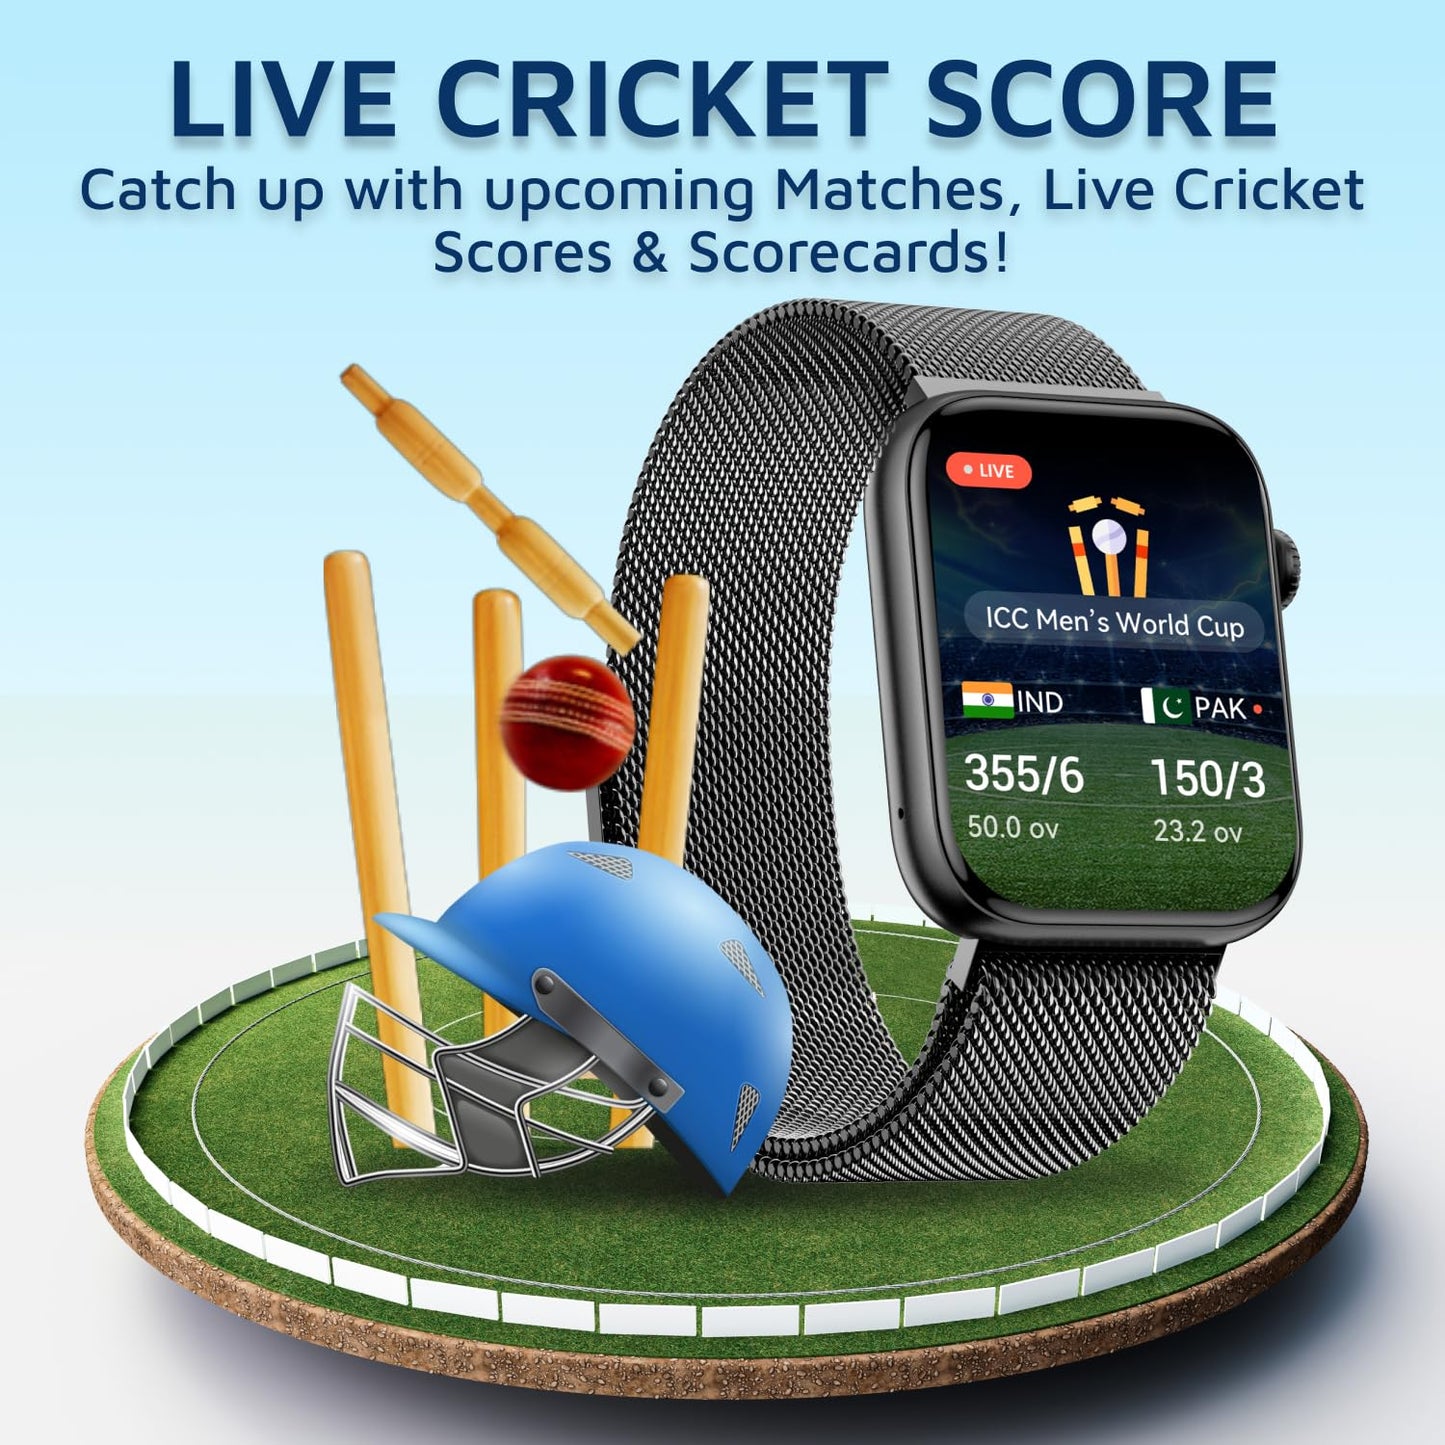 Cultsport Burn Plus 1.78" Amoled, Live Cricket Score, 368 * 448 Best-in-Class Resolution, BT Calling, Crown Control, Always on Display, 7 Days Battery Life,Stainless Steel Mesh Strap, (Black Steel)